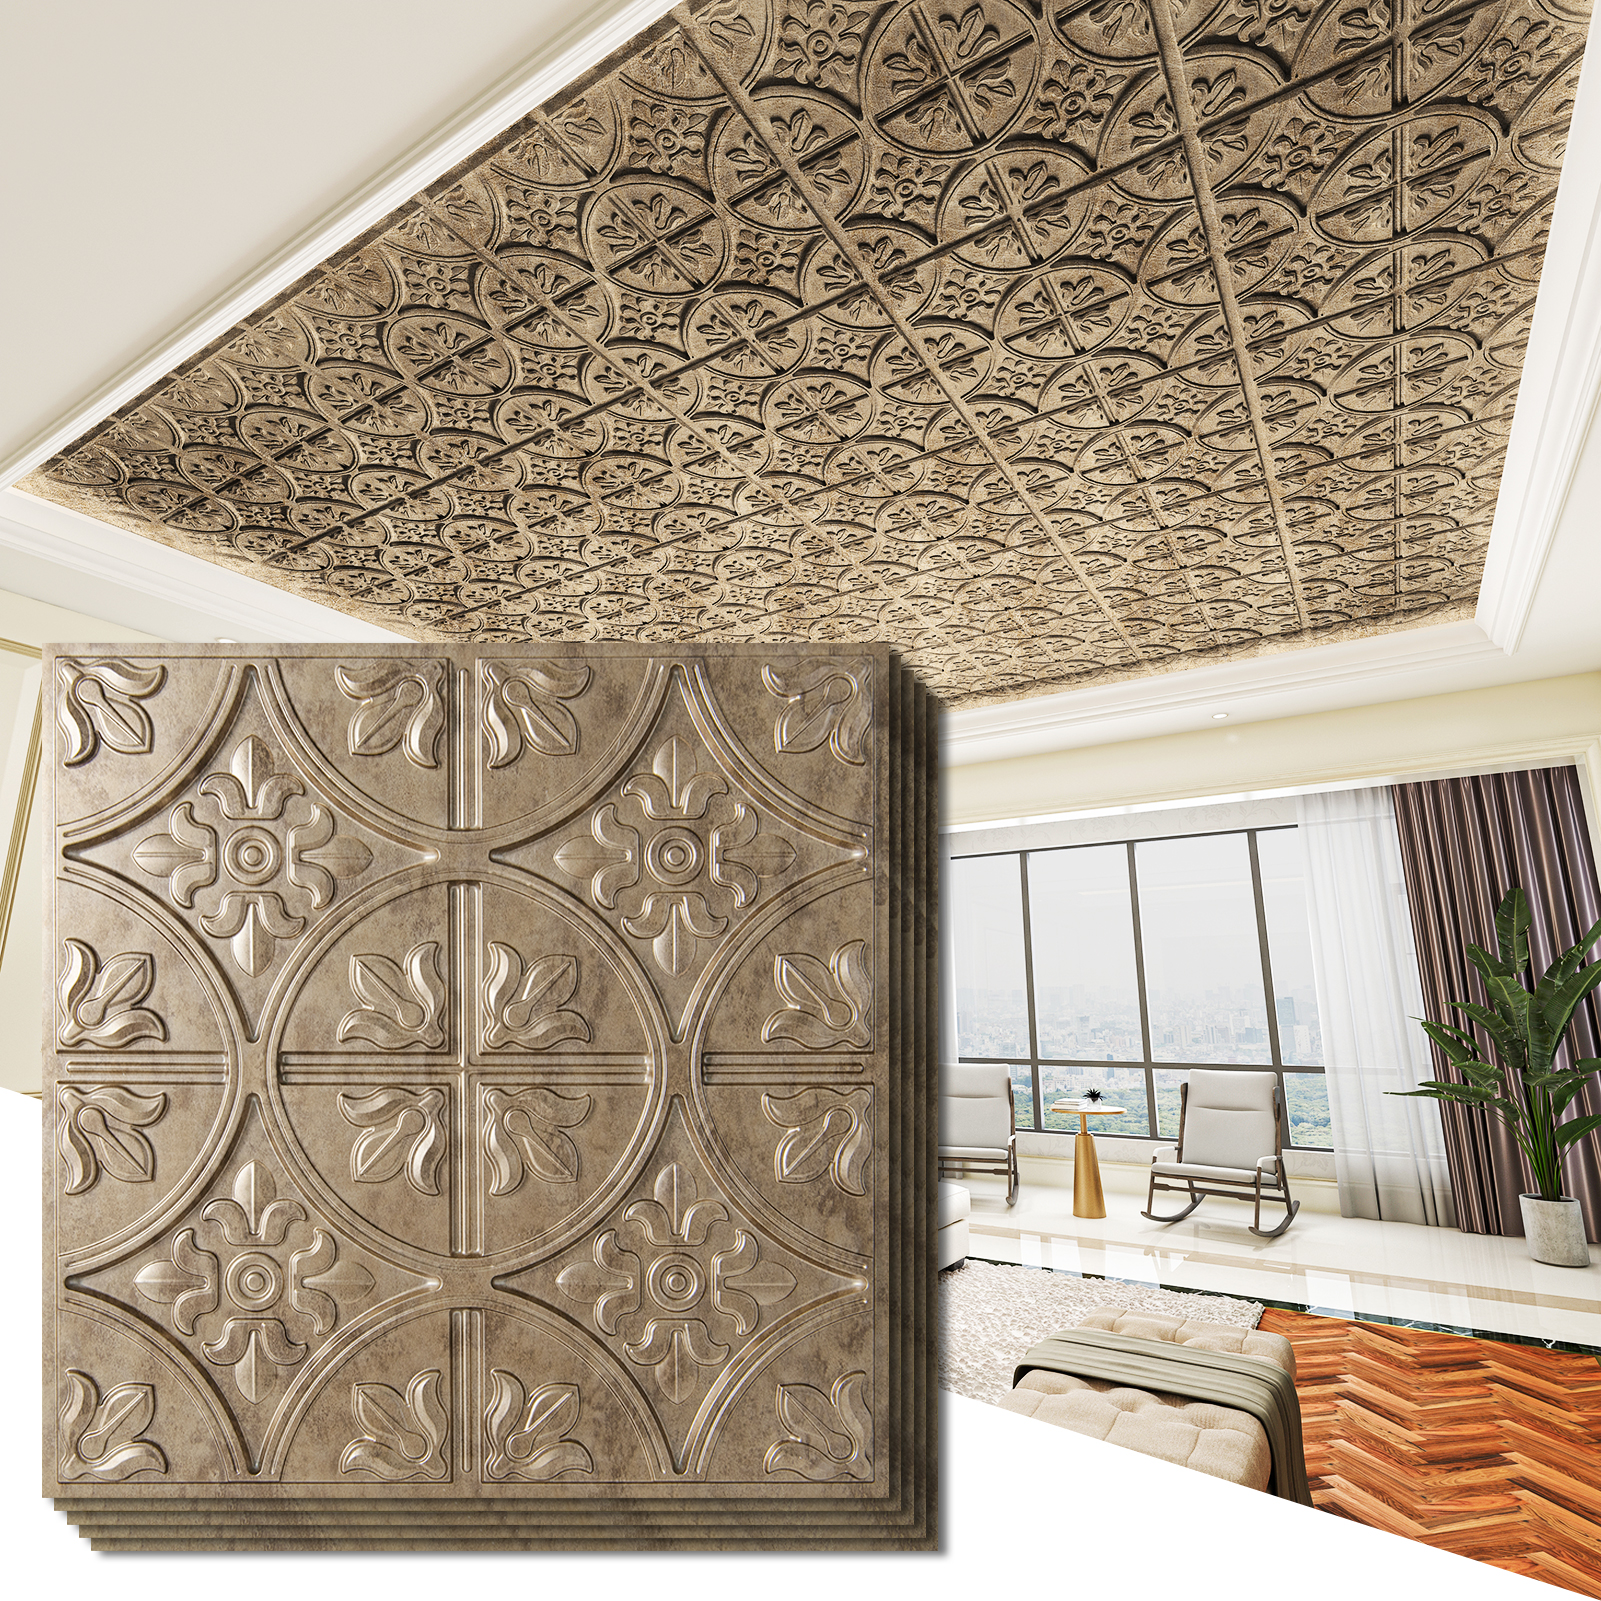 how to cut drop ceiling tiles